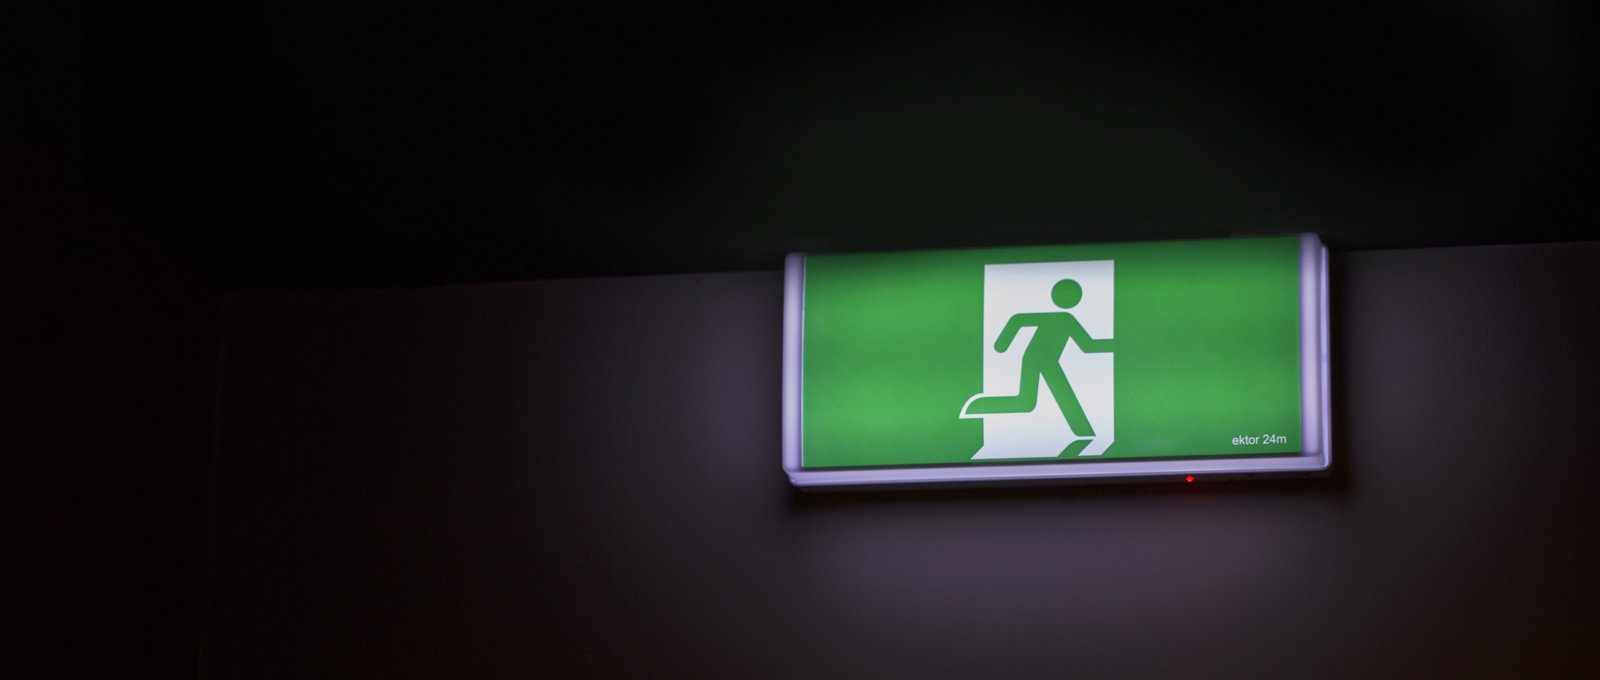 A green emergency exit sign against a black wall